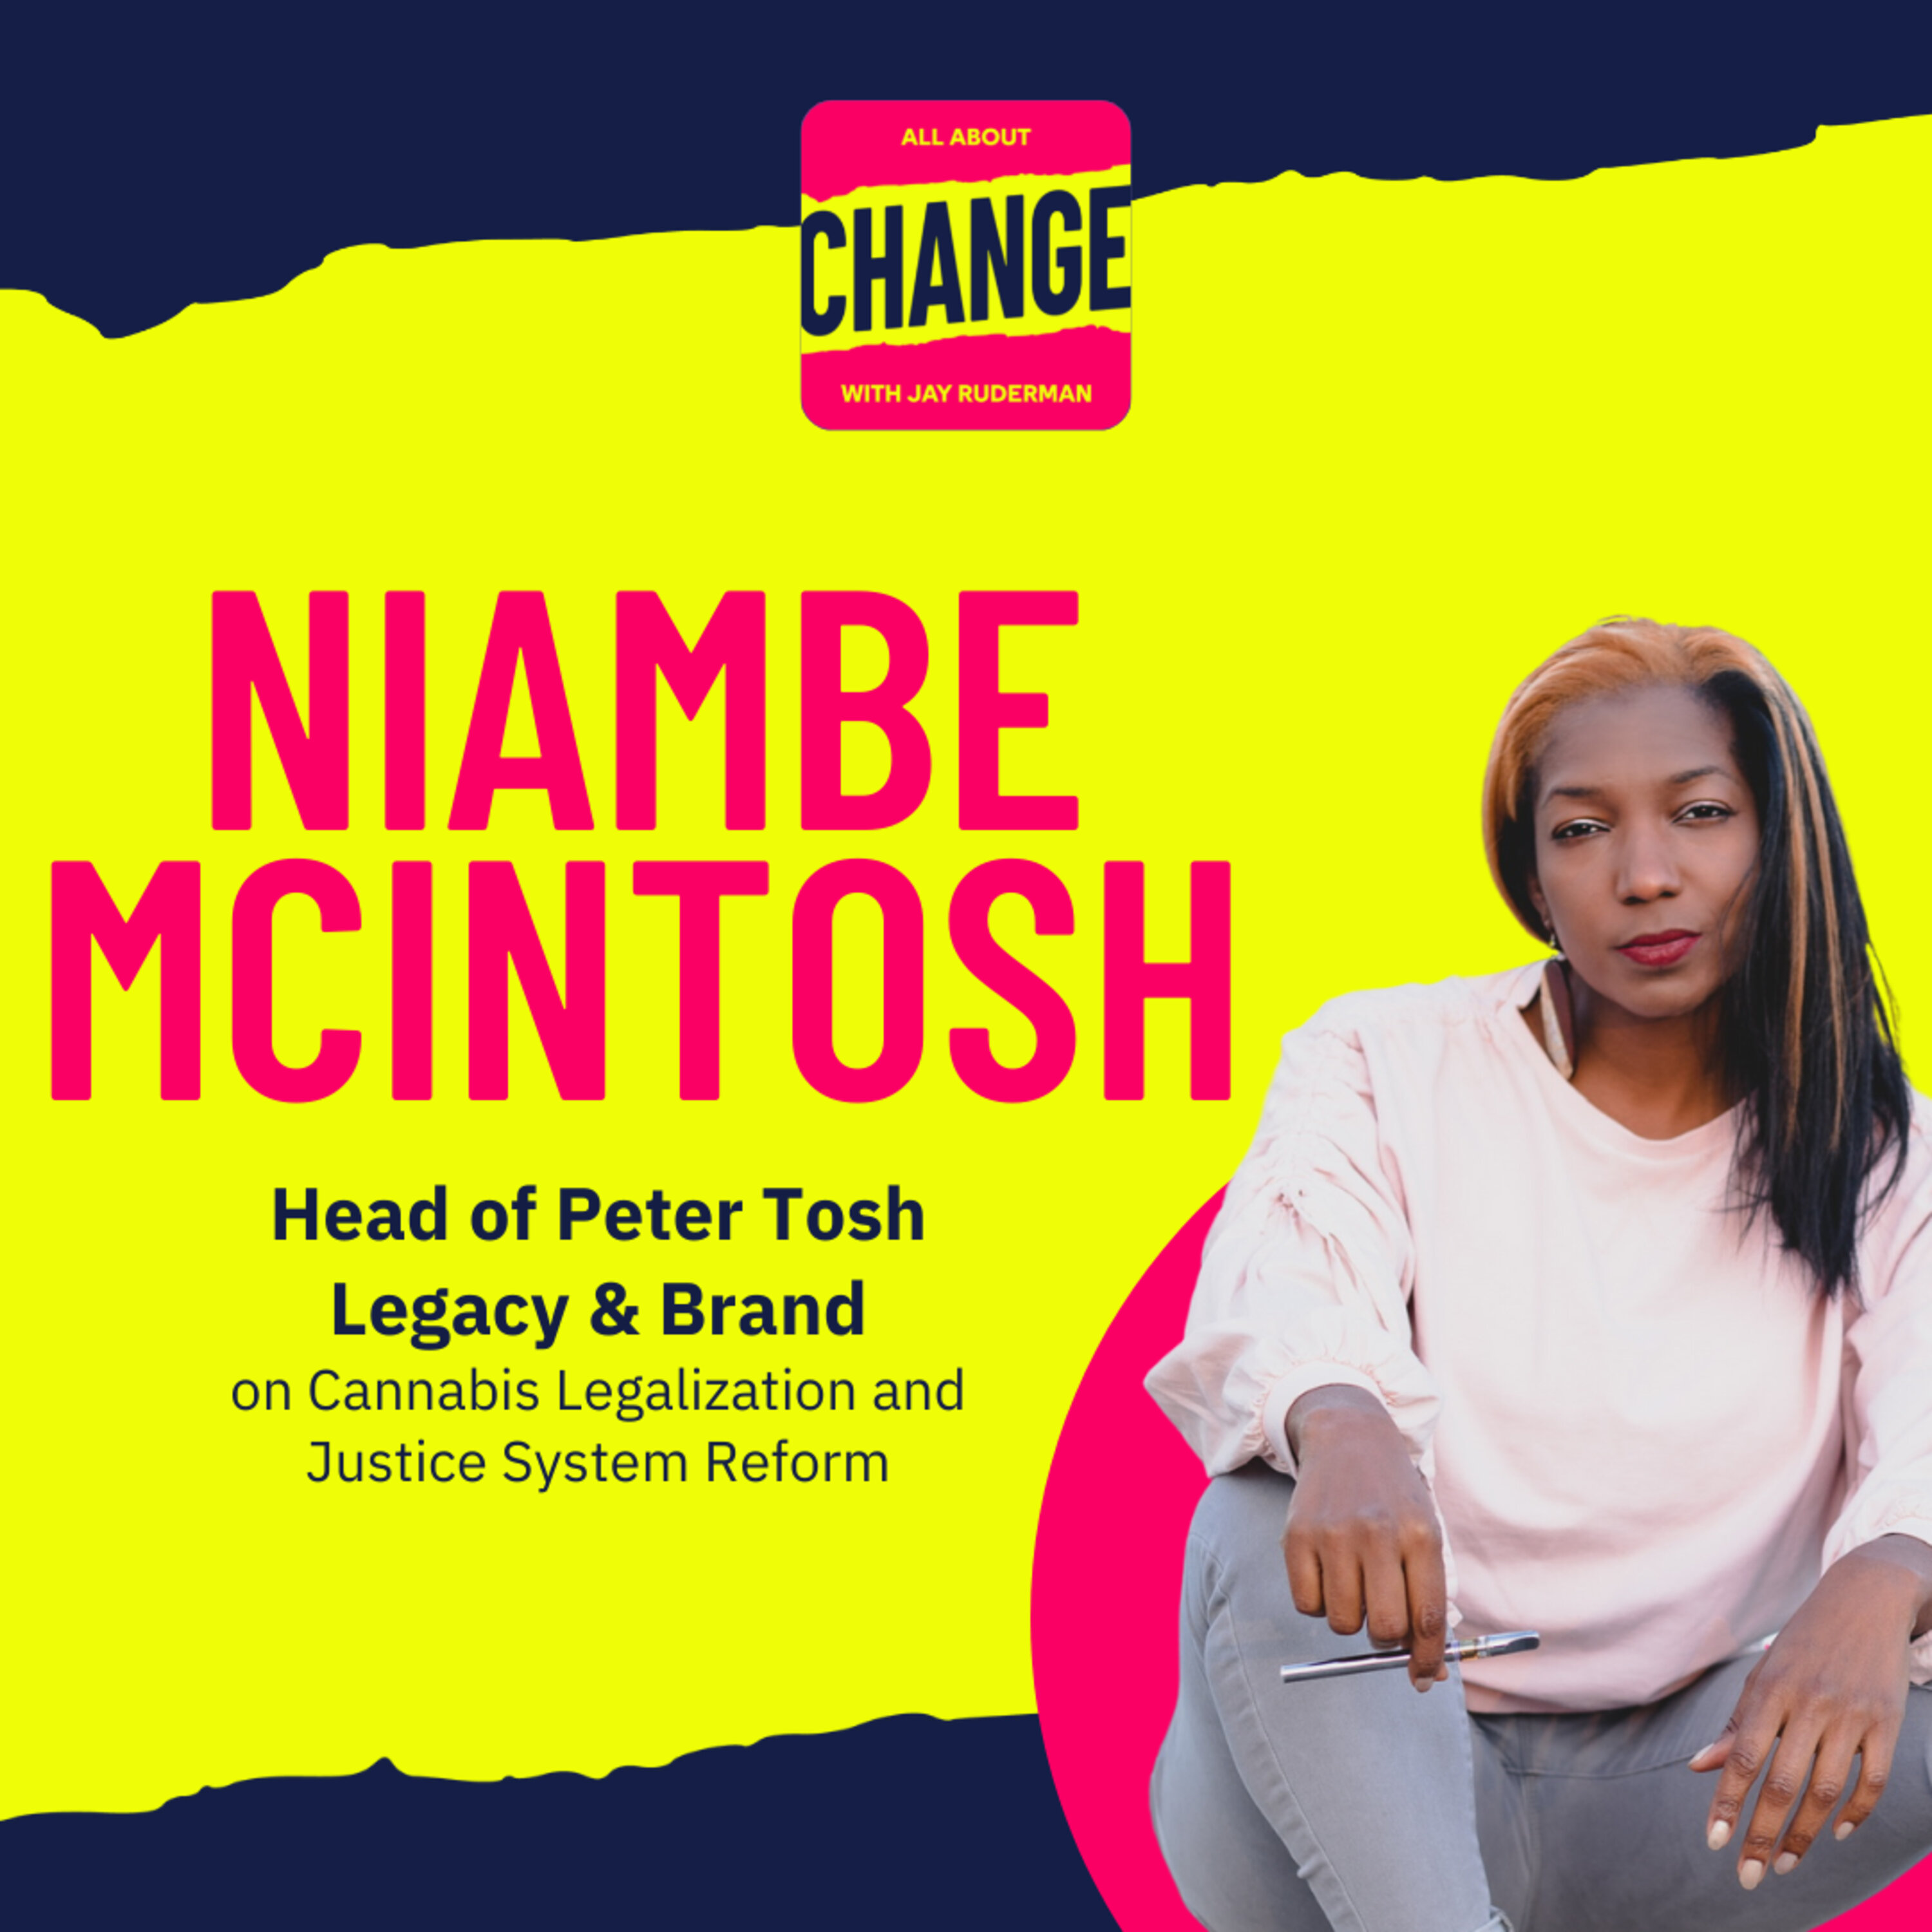 Niambe McIntosh - Head of Peter Tosh Legacy & Brand on Cannabis Legalization and Justice System Reform